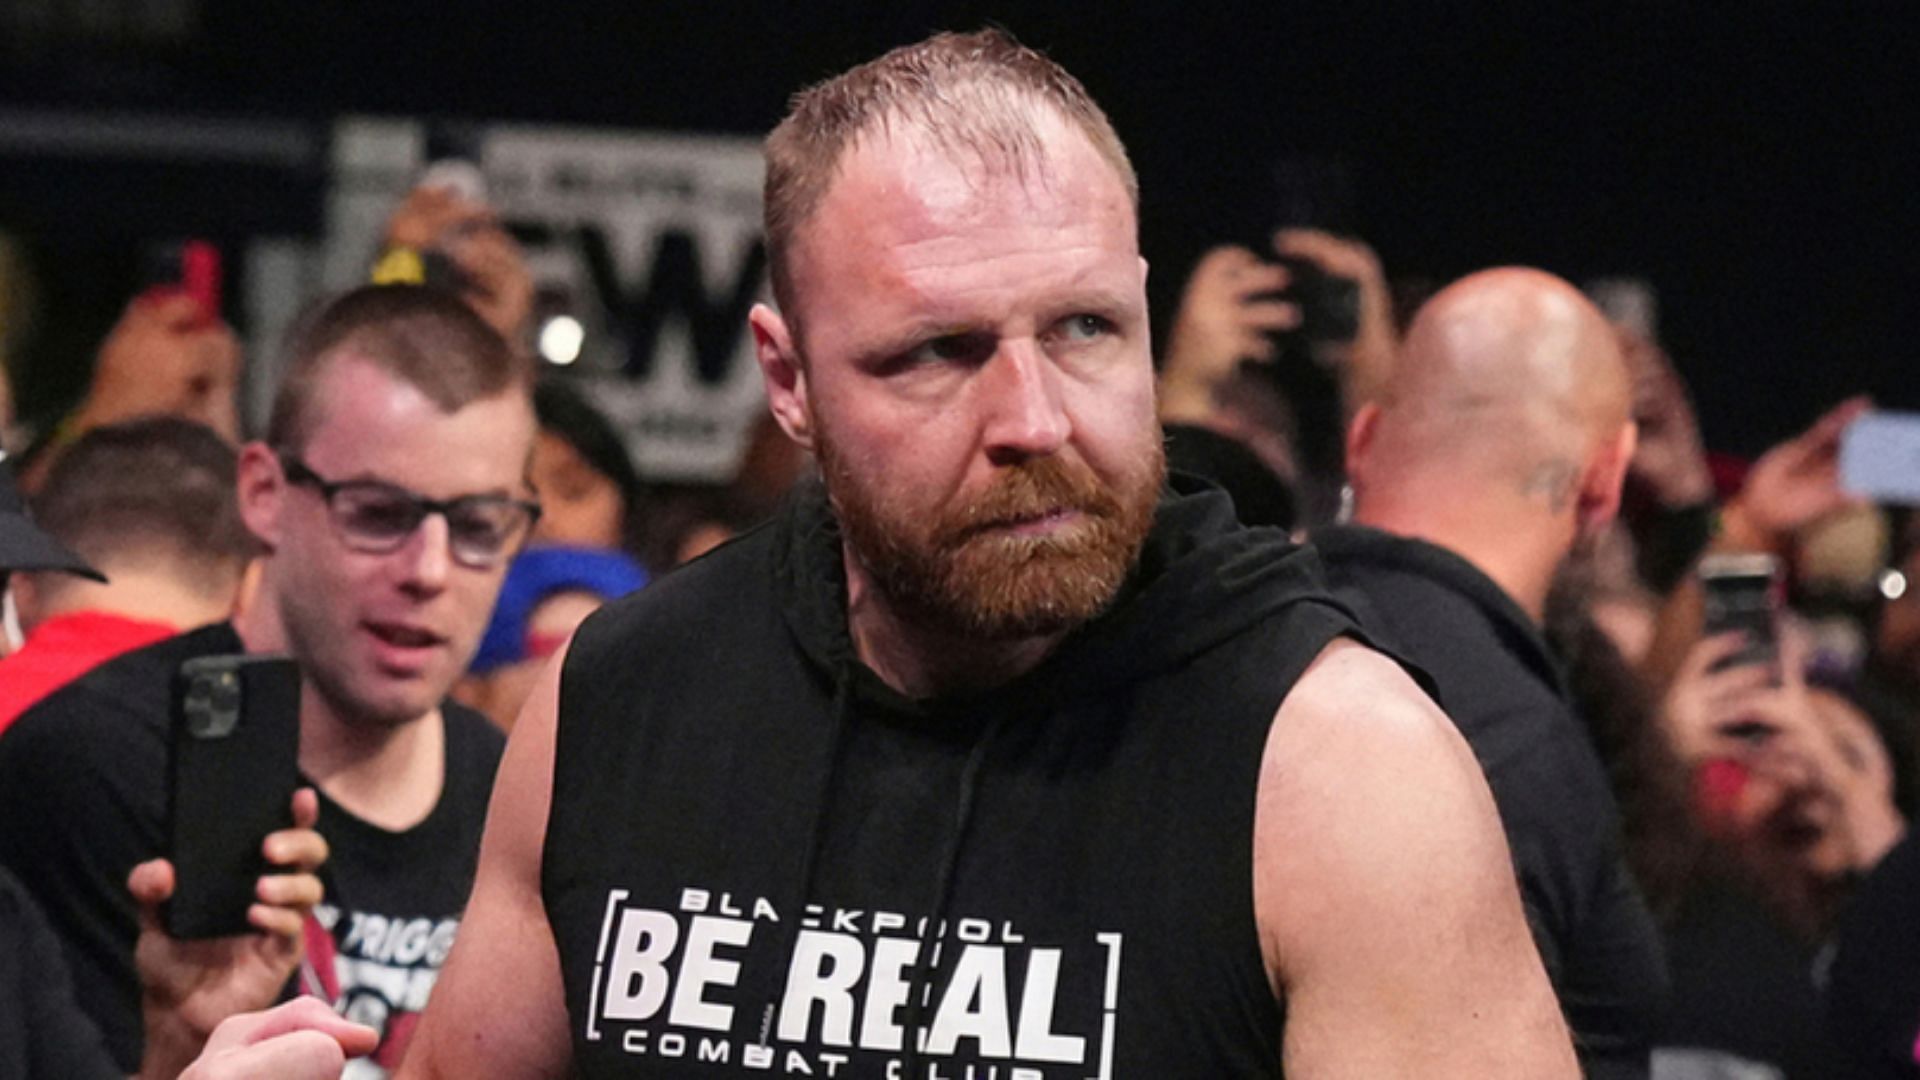 Jon Moxley is a former 3-time AEW World Champion